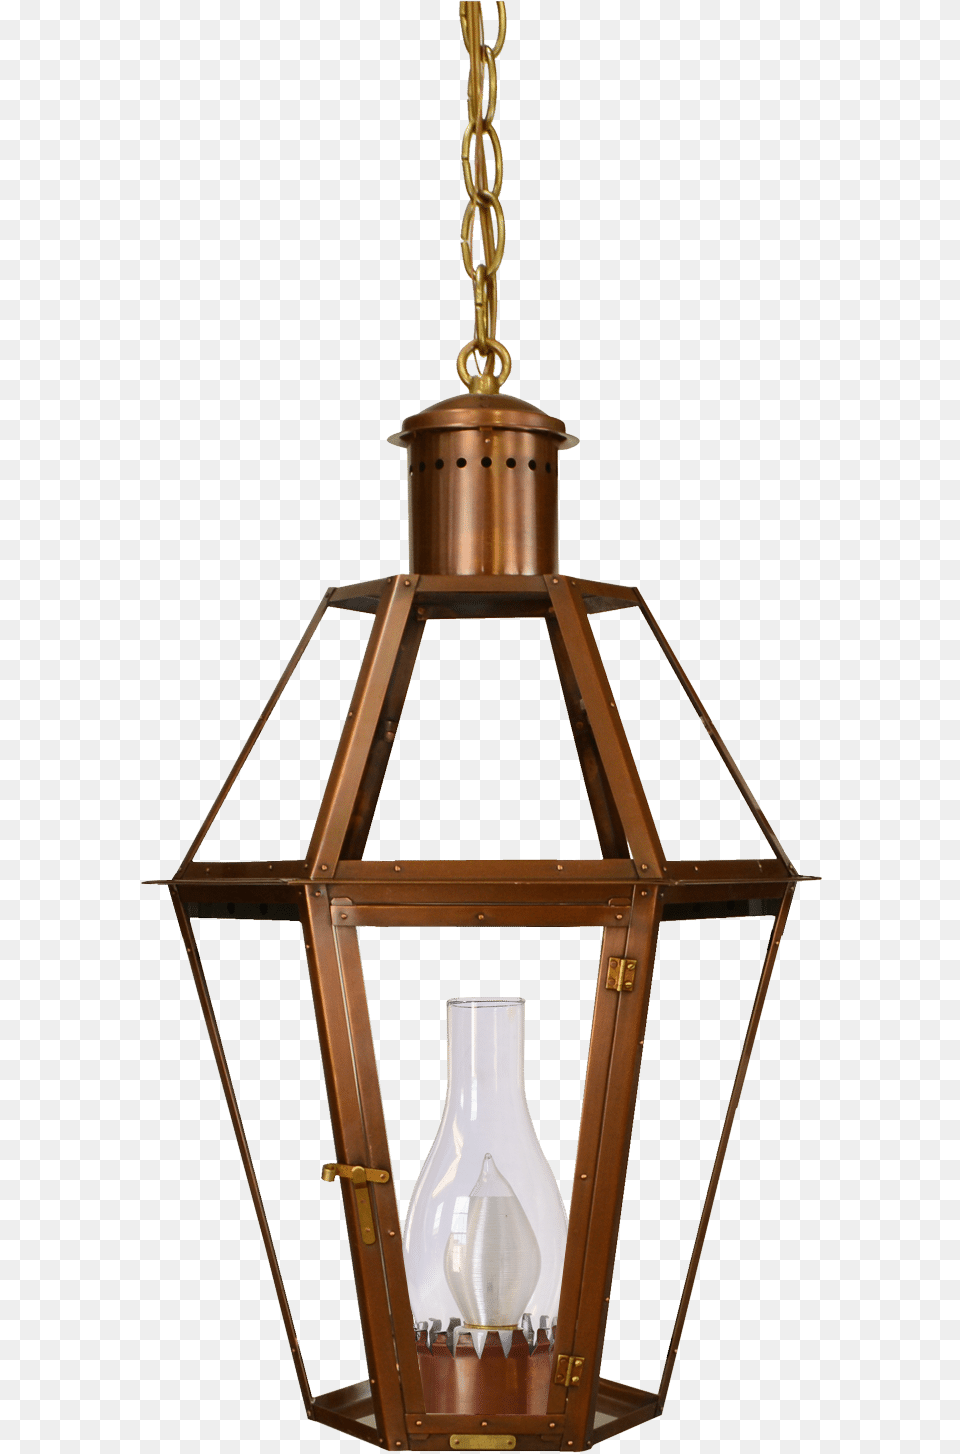 Six Sided Hanging Chain Or Stem Fixture, Lamp, Chandelier, Lantern, Light Fixture Free Transparent Png